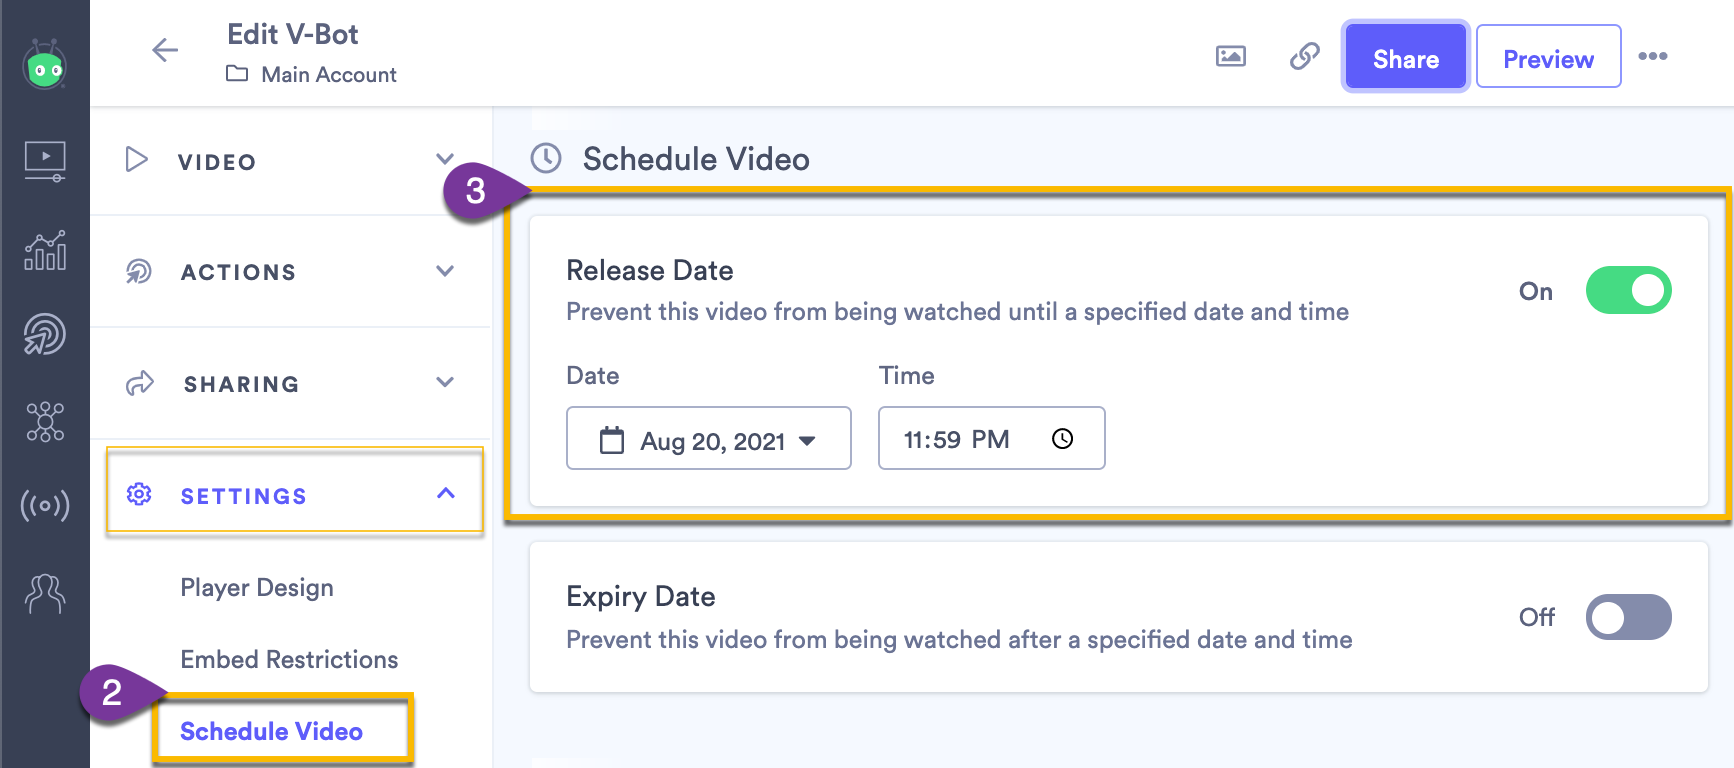 Video Settings page with option to schedule release time and date